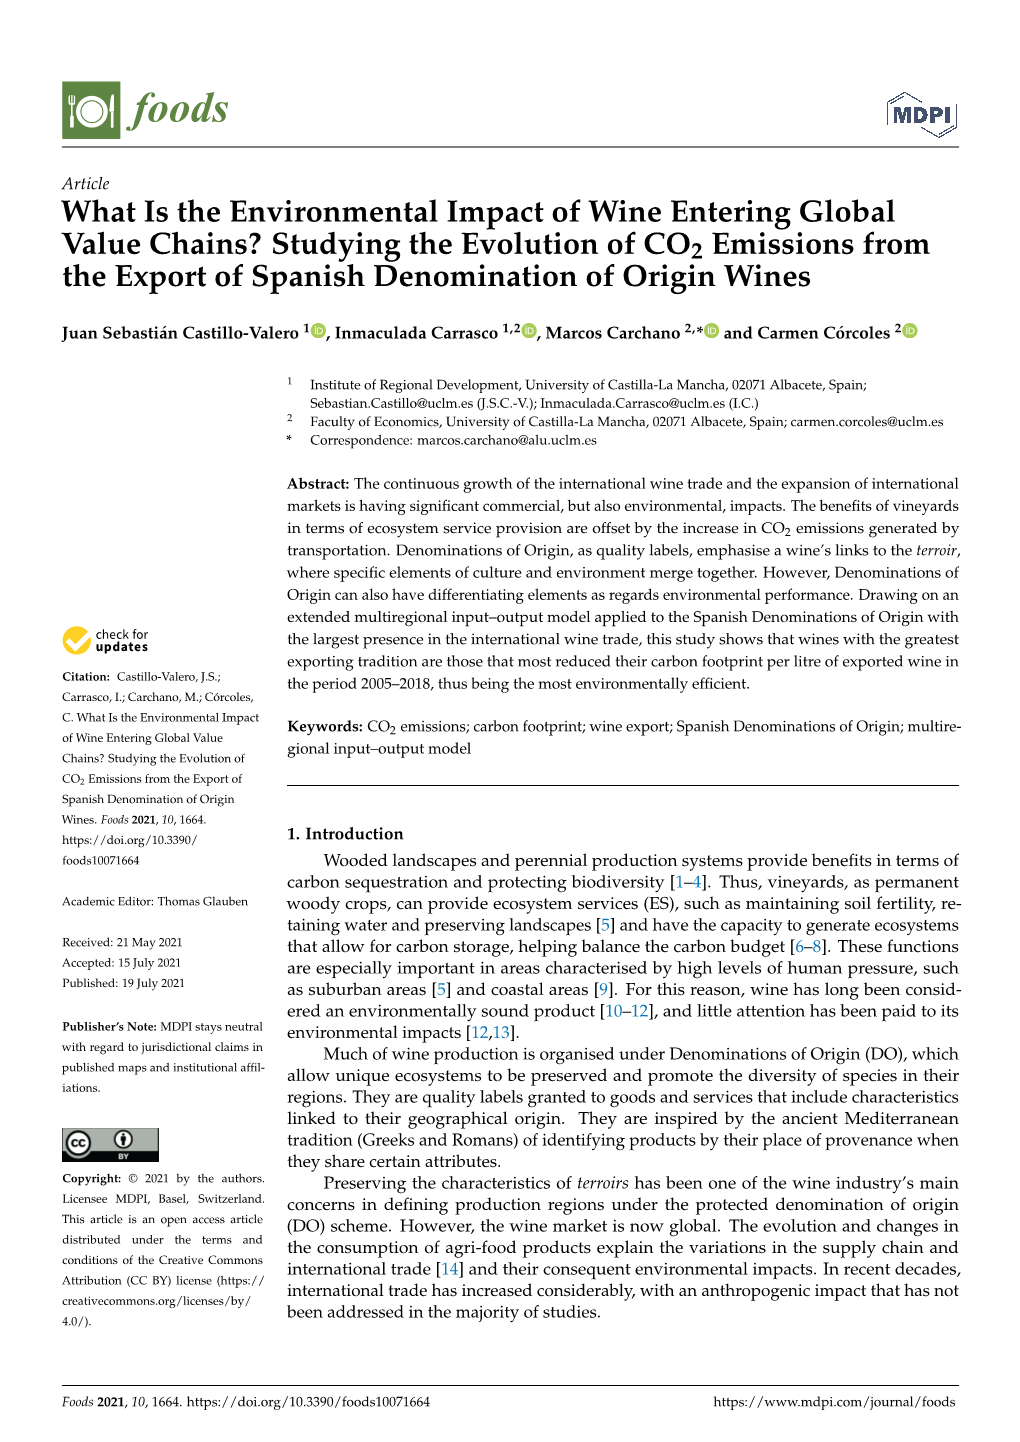 What Is the Environmental Impact of Wine Entering Global Value Chains? Studying the Evolution of CO2 Emissions from the Export of Spanish Denomination of Origin Wines